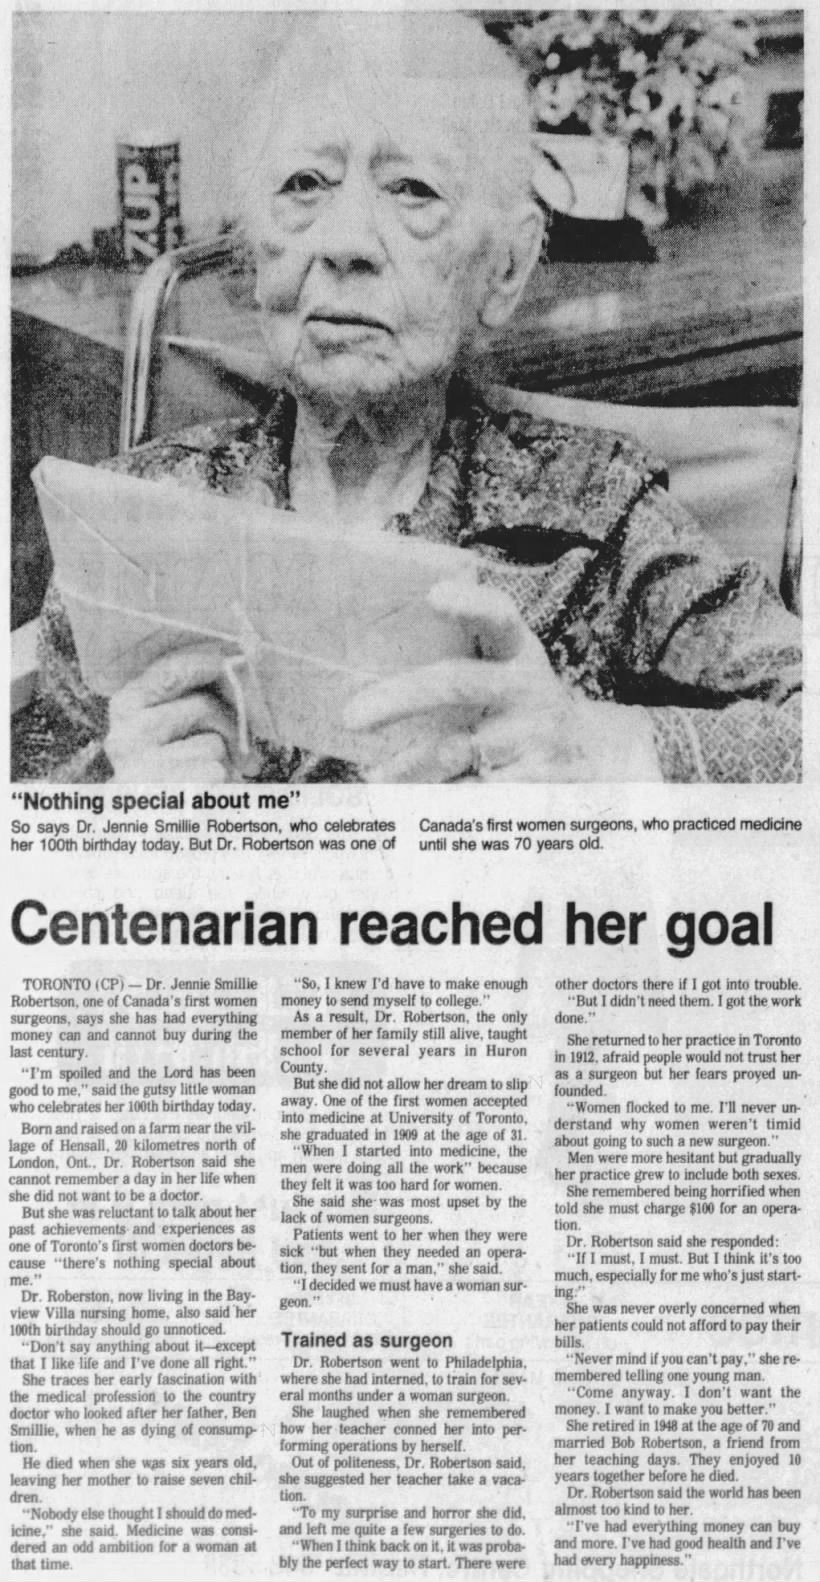 Centennarian reached her goal - Article about Jennie Smillie Robertson